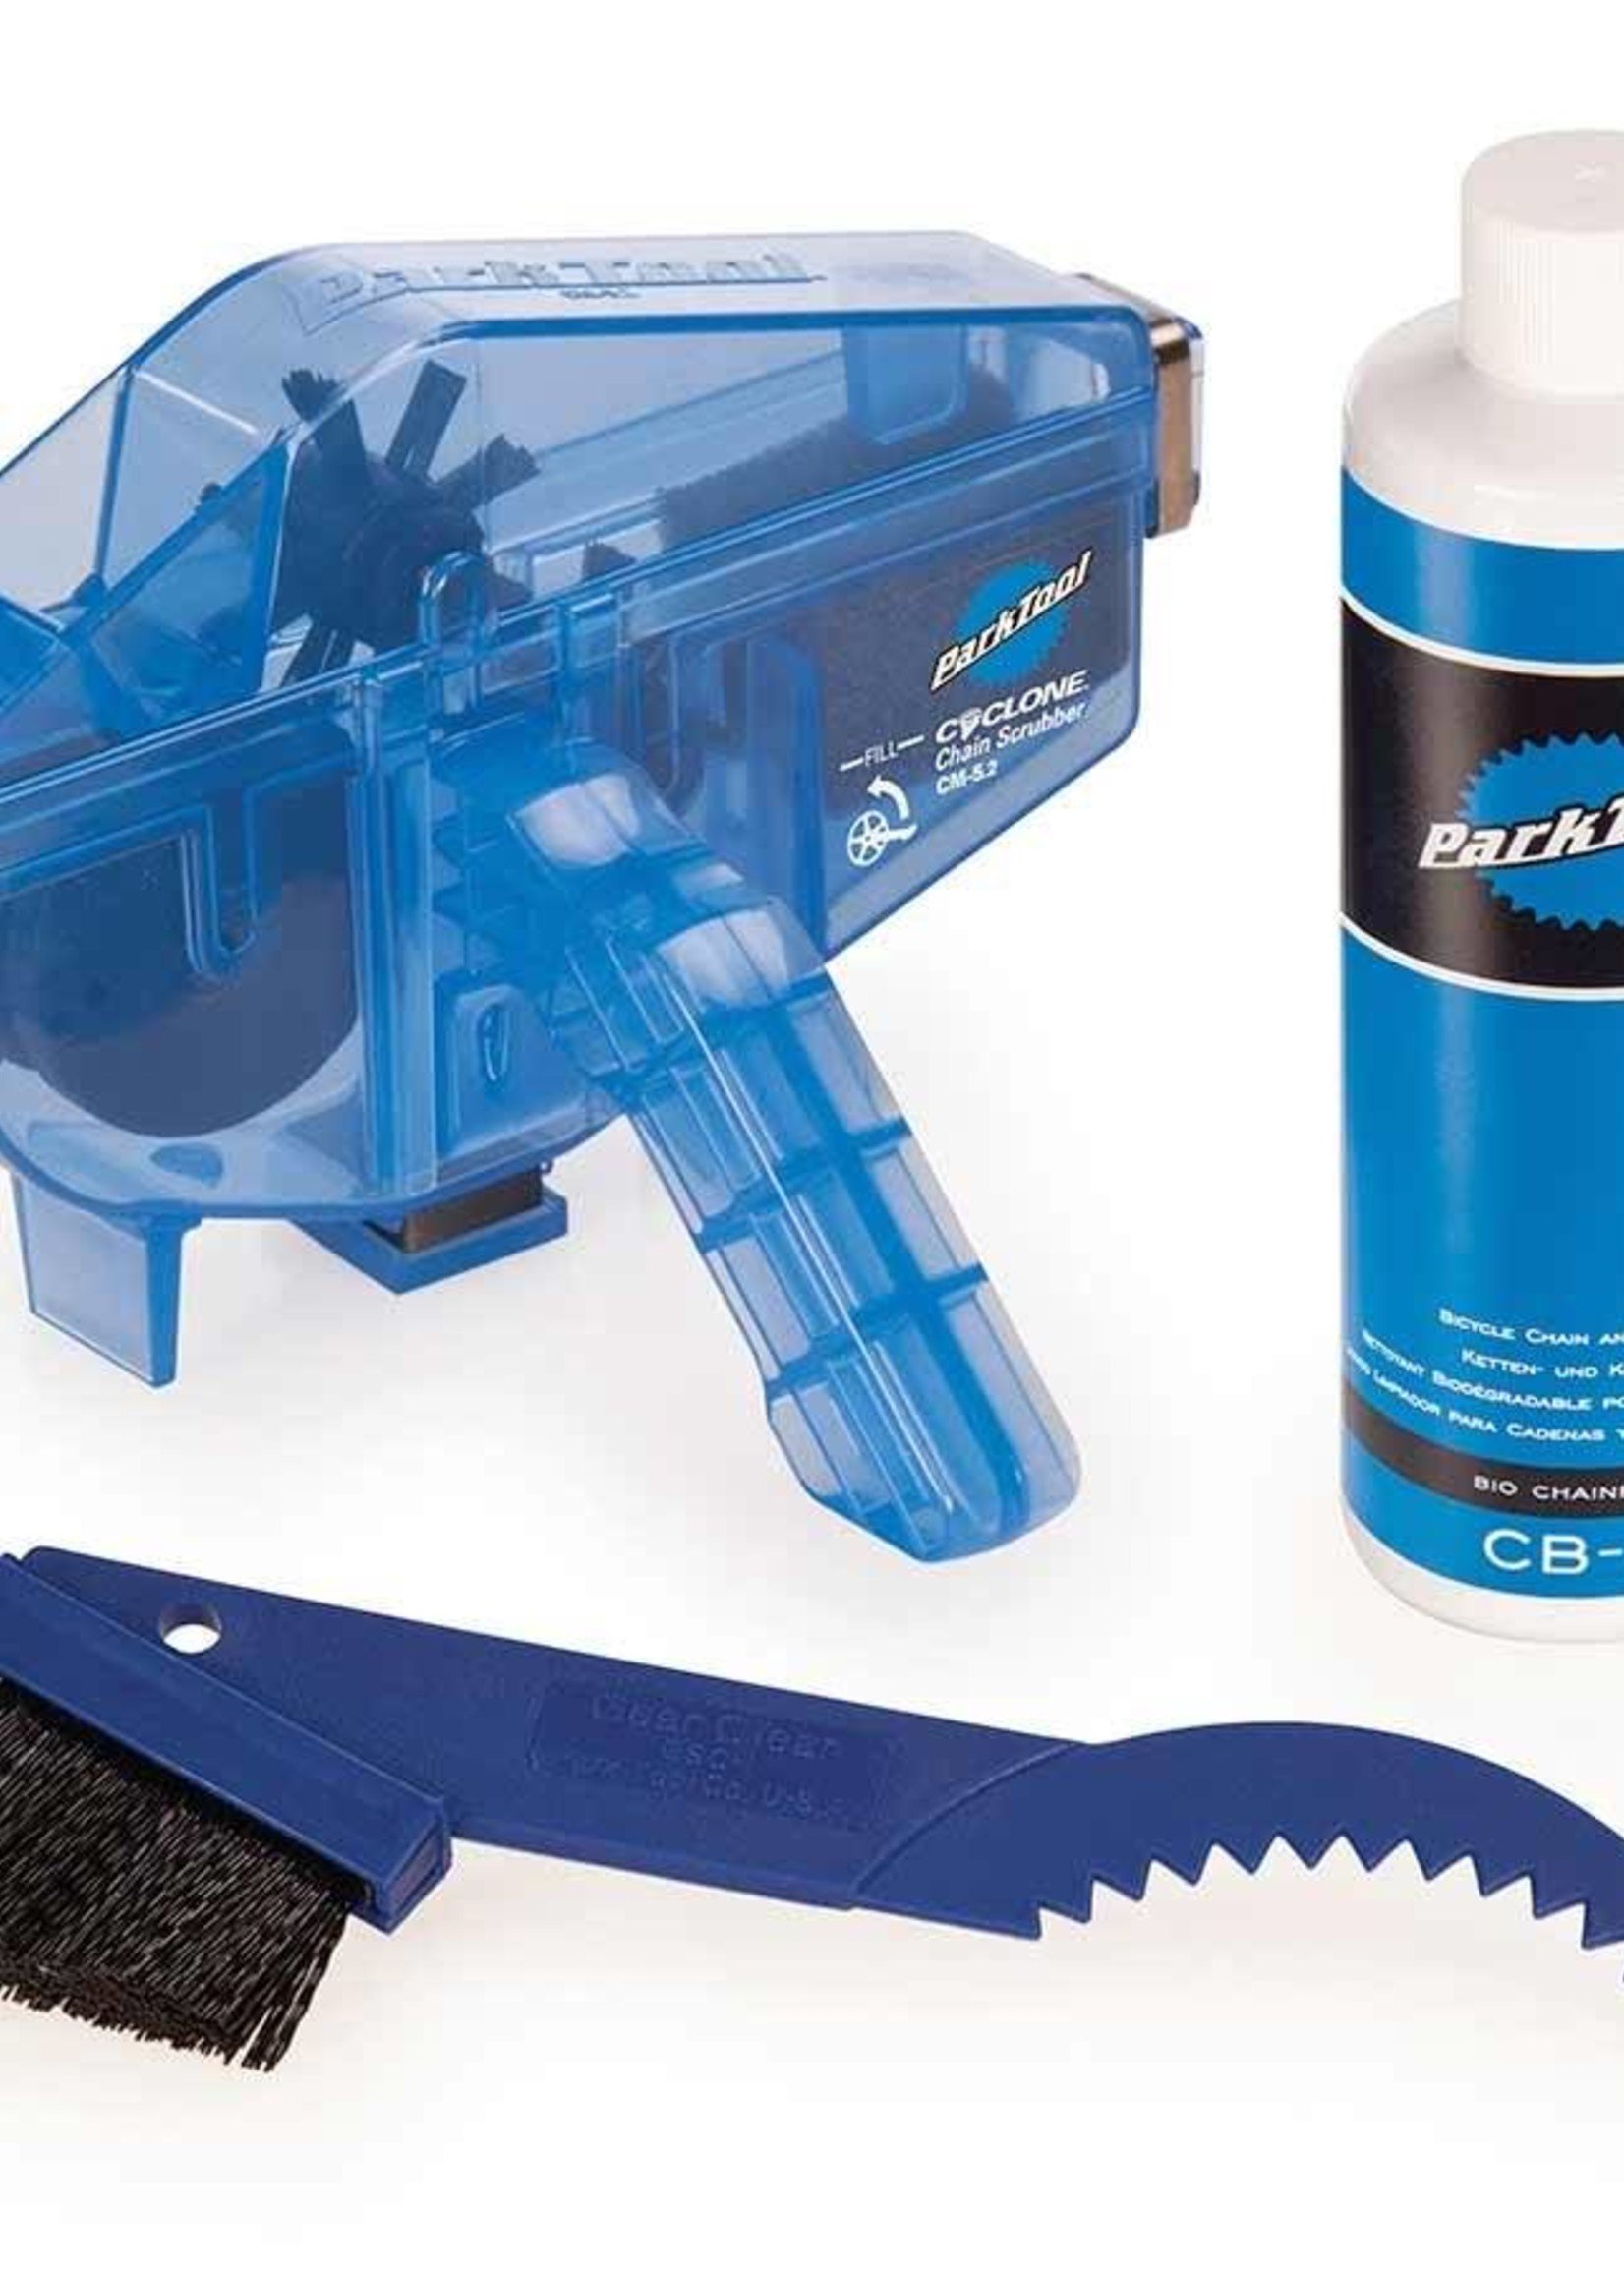 Park Tl, CG-2.3, Chain cleaning kit